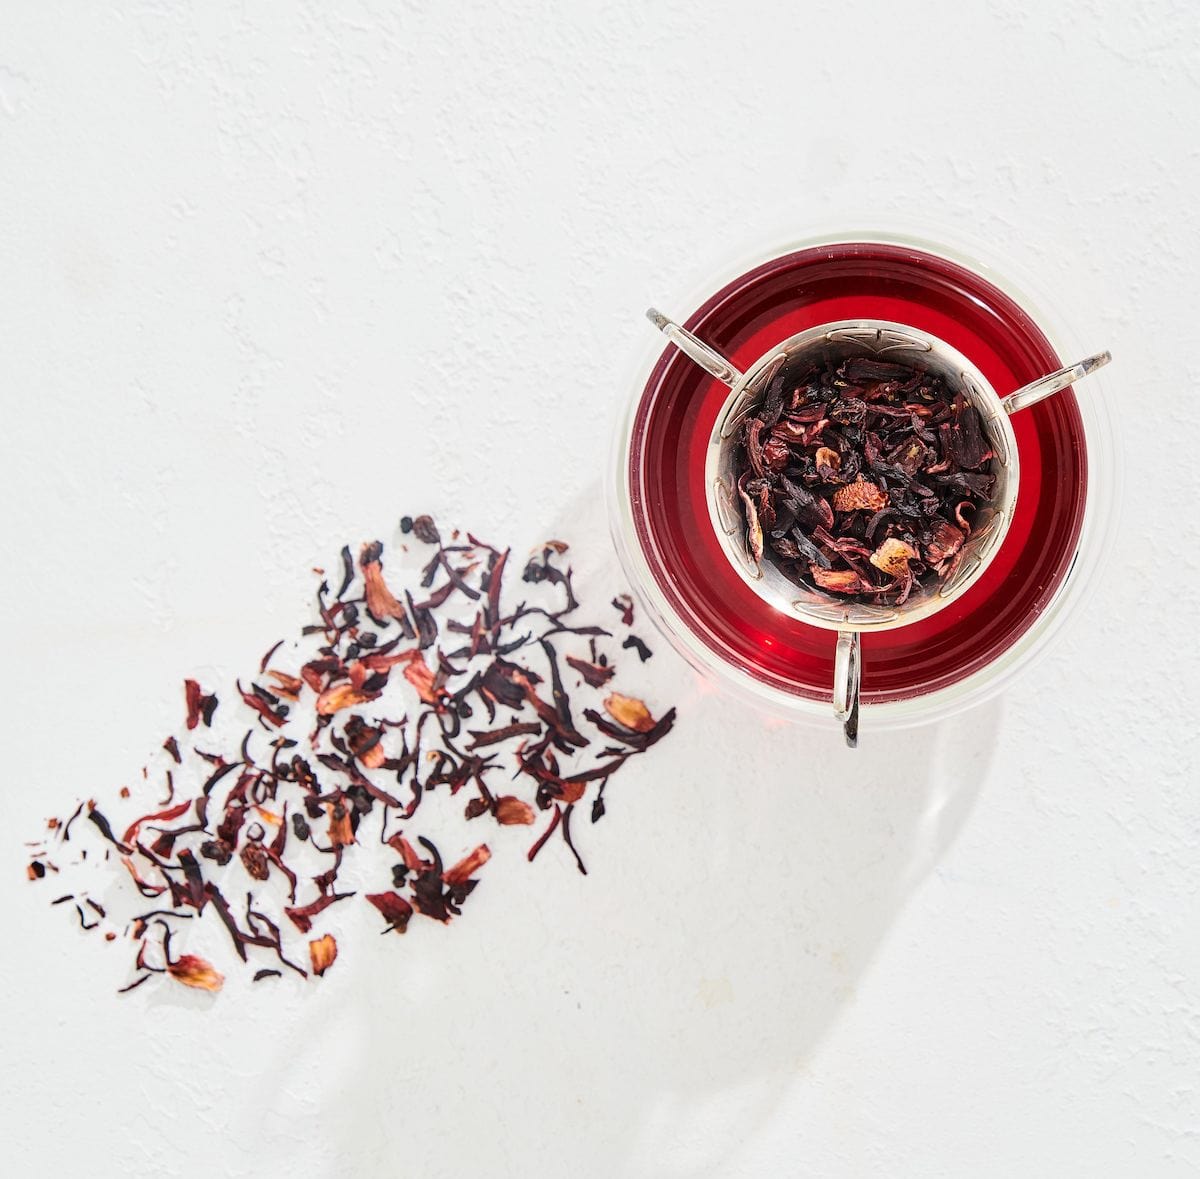 A glass cup filled with vibrant Magic Hour Immune Boosting Teas Sampler Set sits on a white surface. Loose leaf tea and petals are scattered beside the cup, while a metal tea infuser containing organic tea is placed on top, casting a delicate shadow.